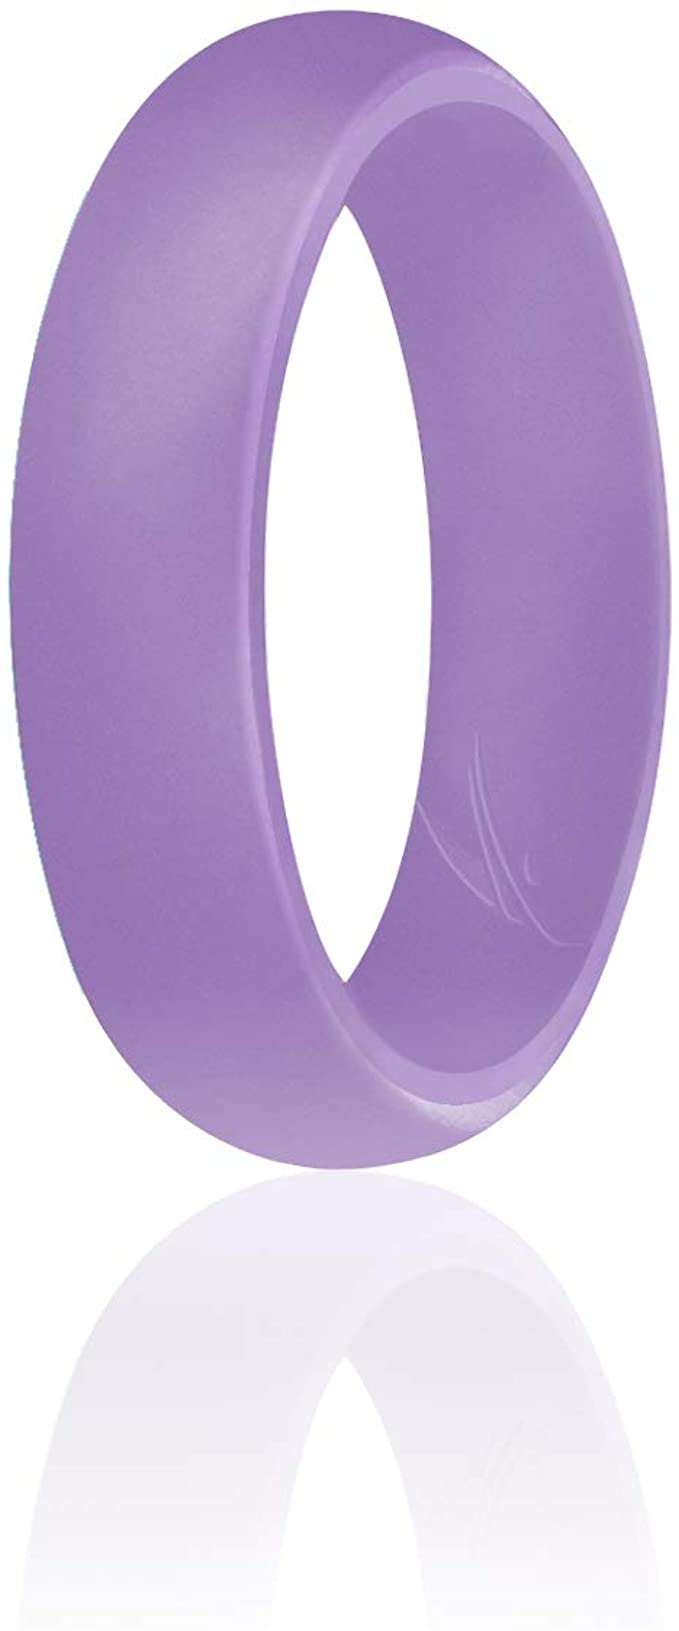 ROQ Flexible Women’s Silicone Ring